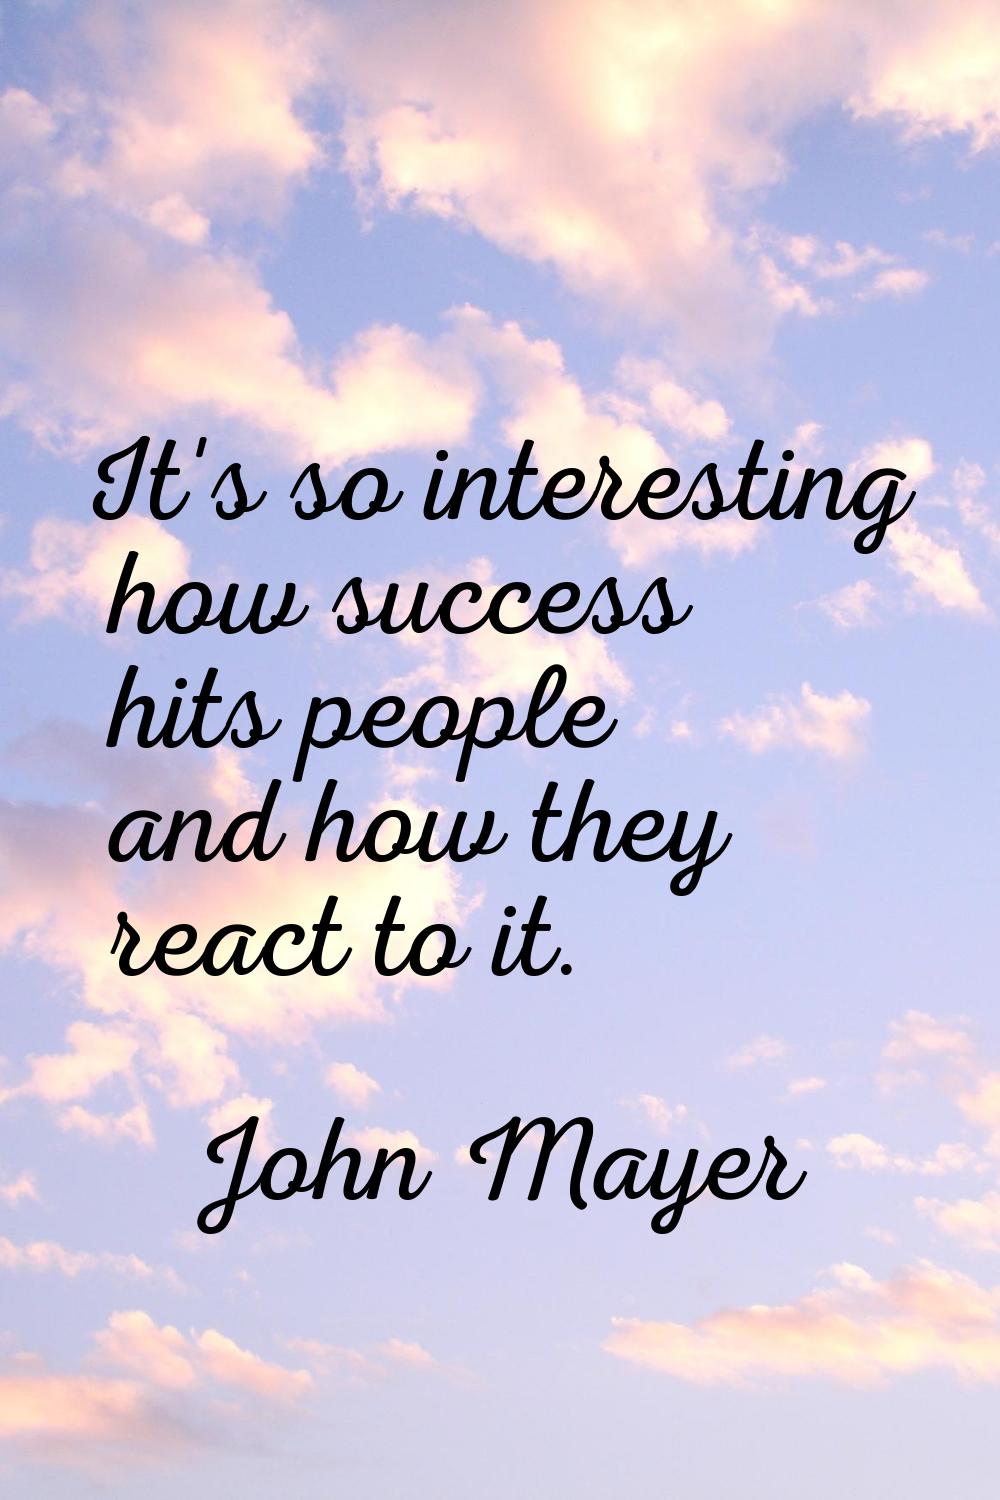 It's so interesting how success hits people and how they react to it.